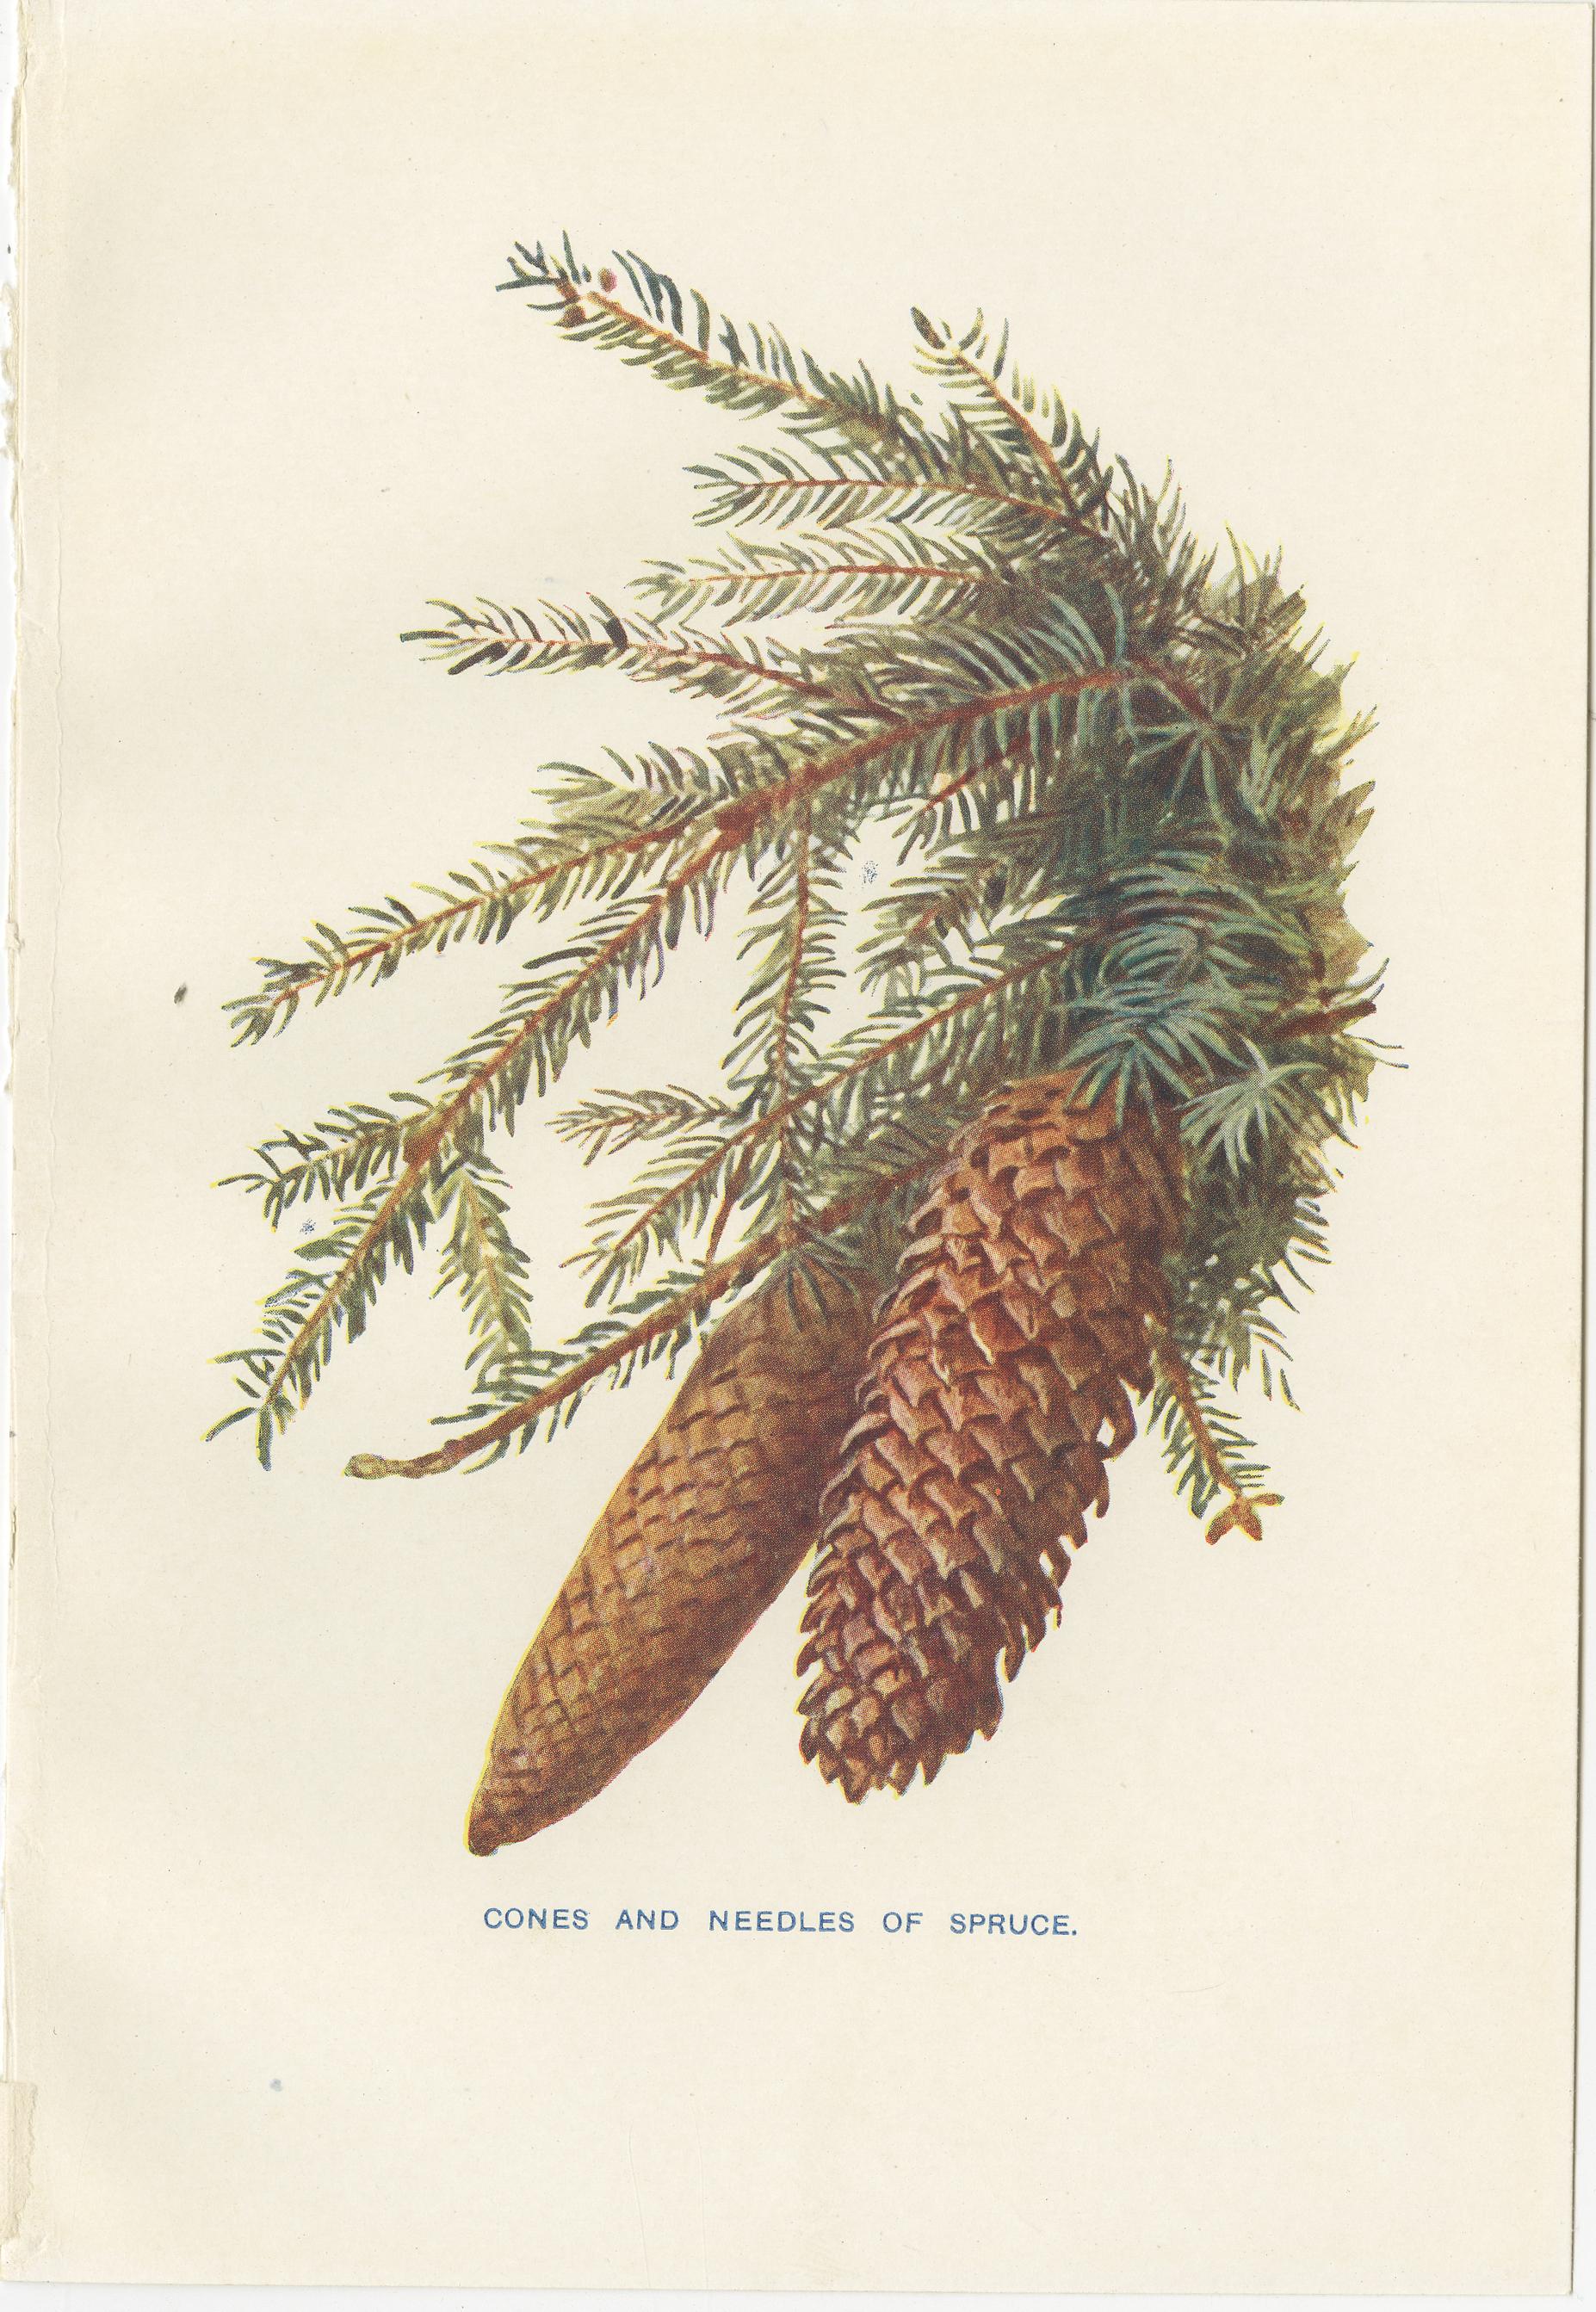 Antique print of various pine trees and pine cones titled 'Cones and Leaves of Cypress - Cones and Needles of Spruce - Cones and Needles of Cedar of Lebanon - Cone and Leaves of Stone Pine'. Source unknown, to be determined. Published circa 1930.